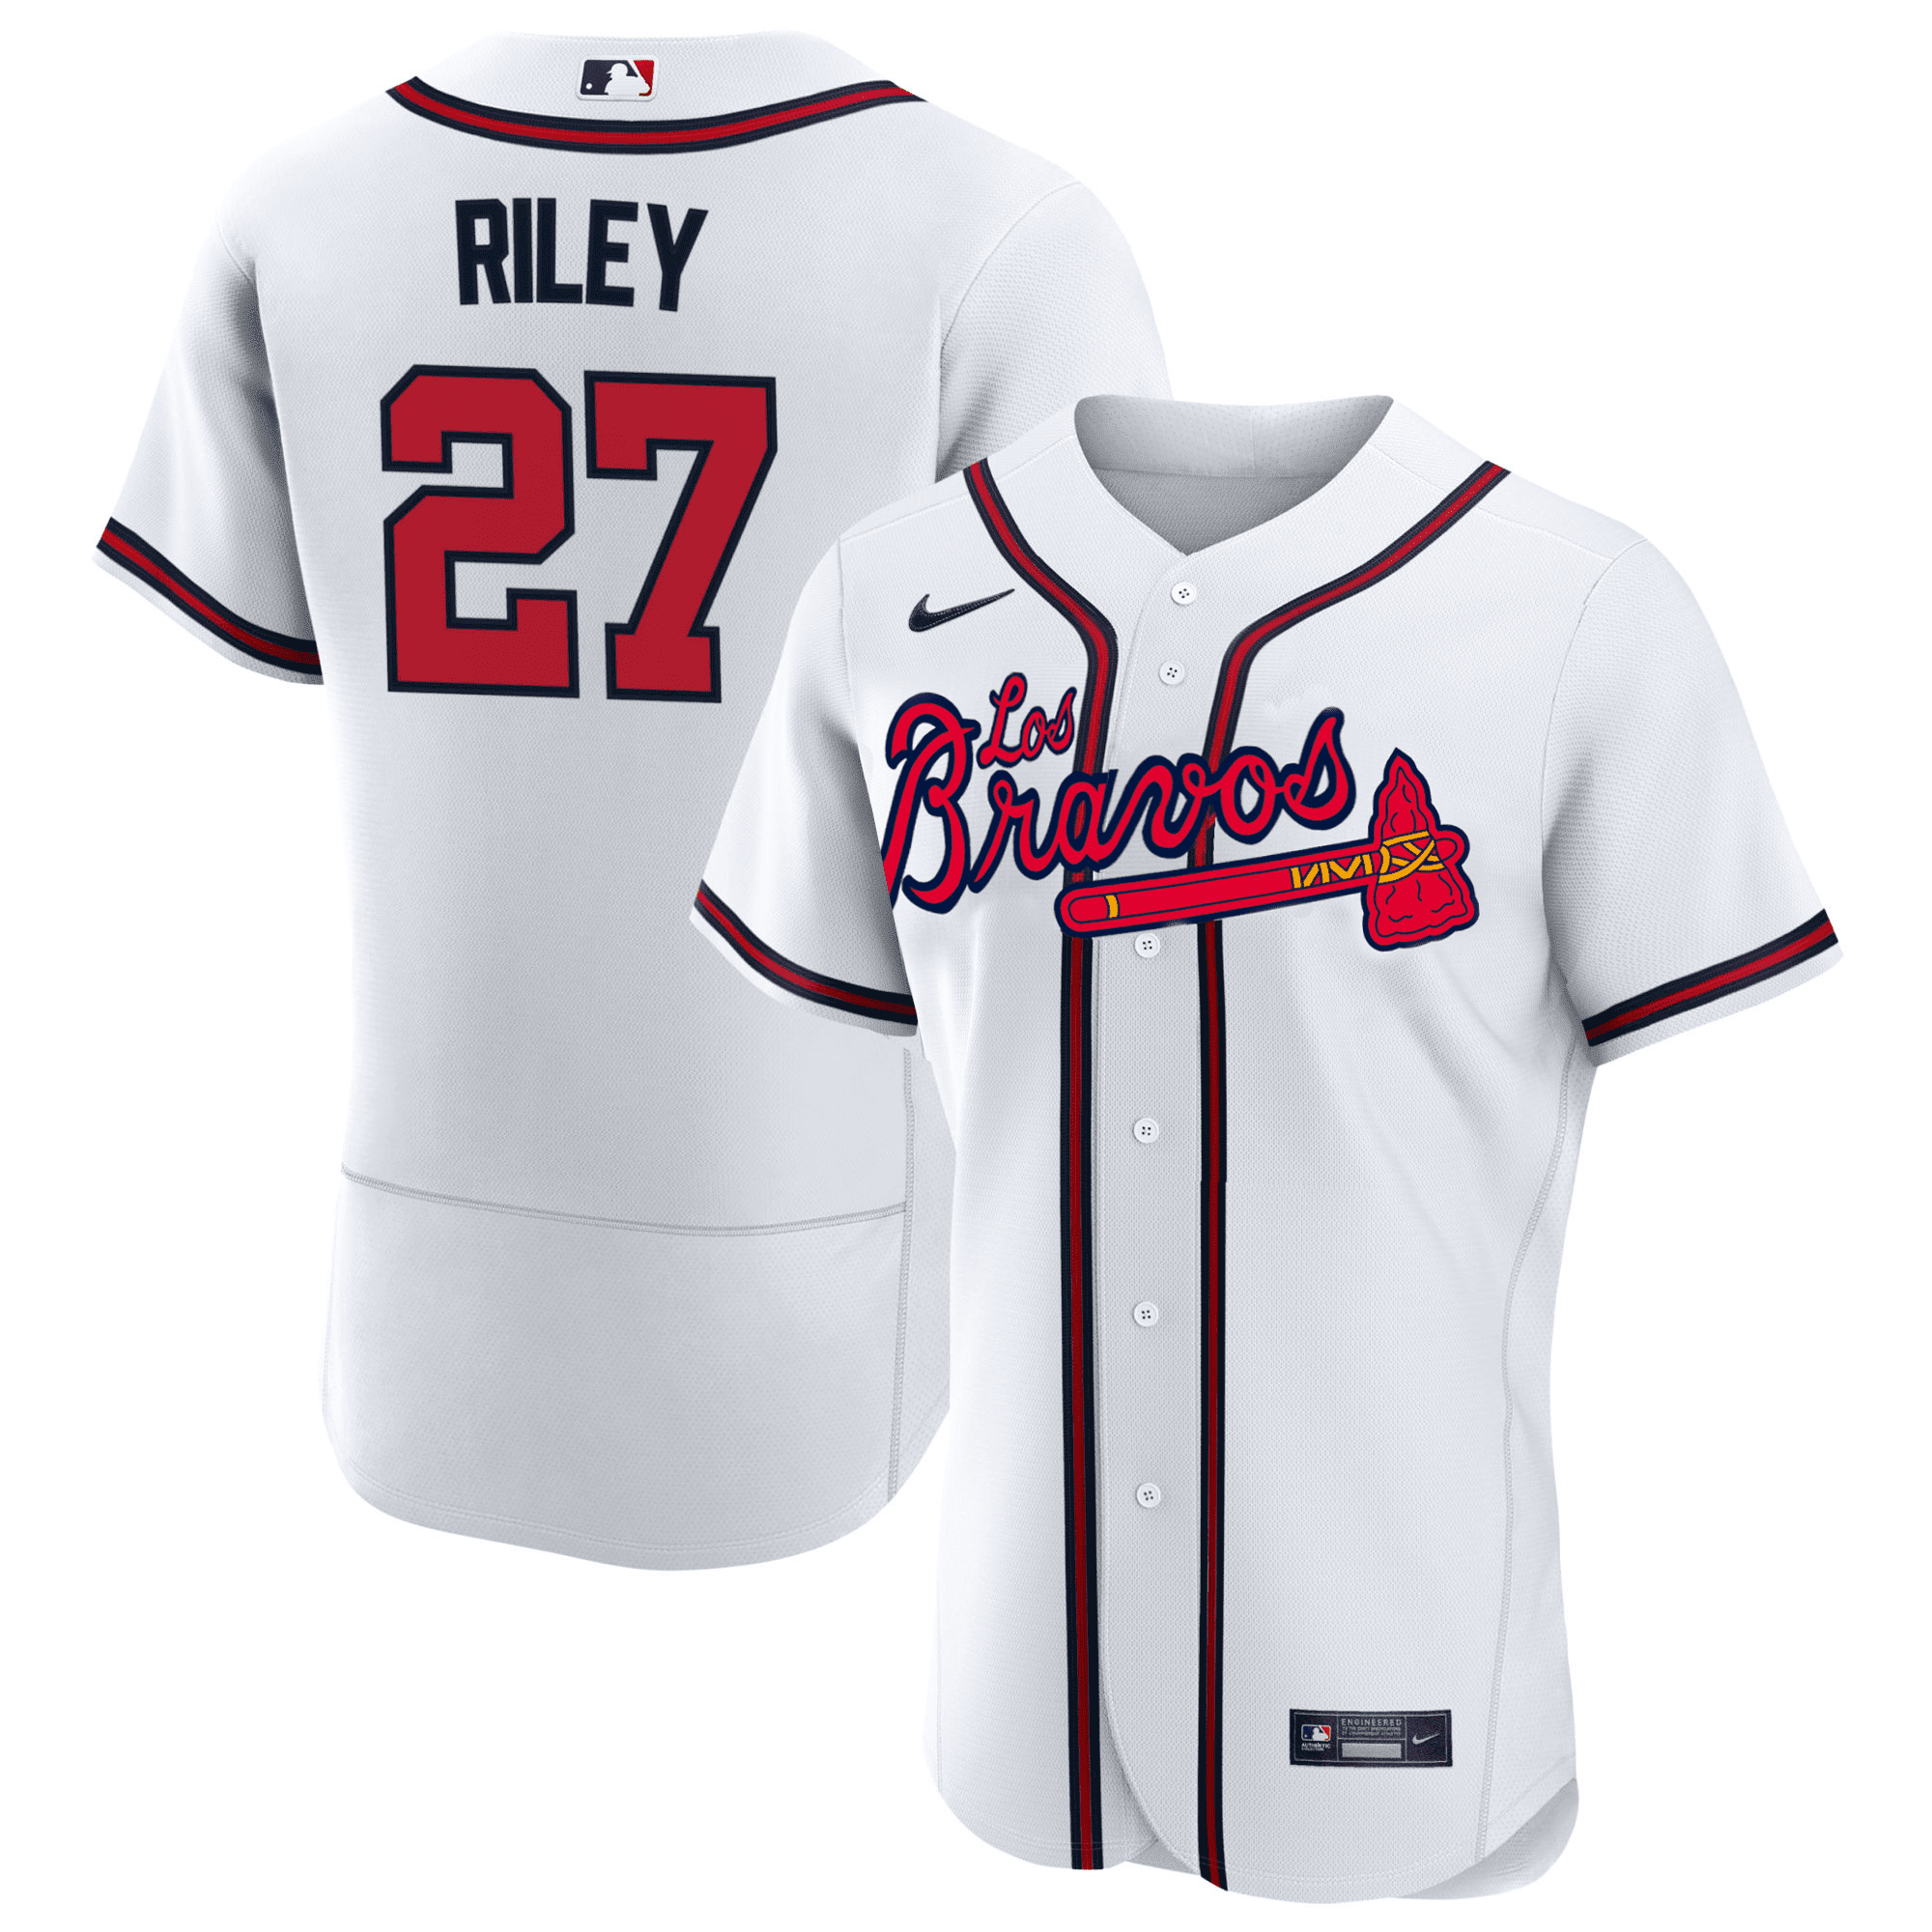 youth xl braves jersey